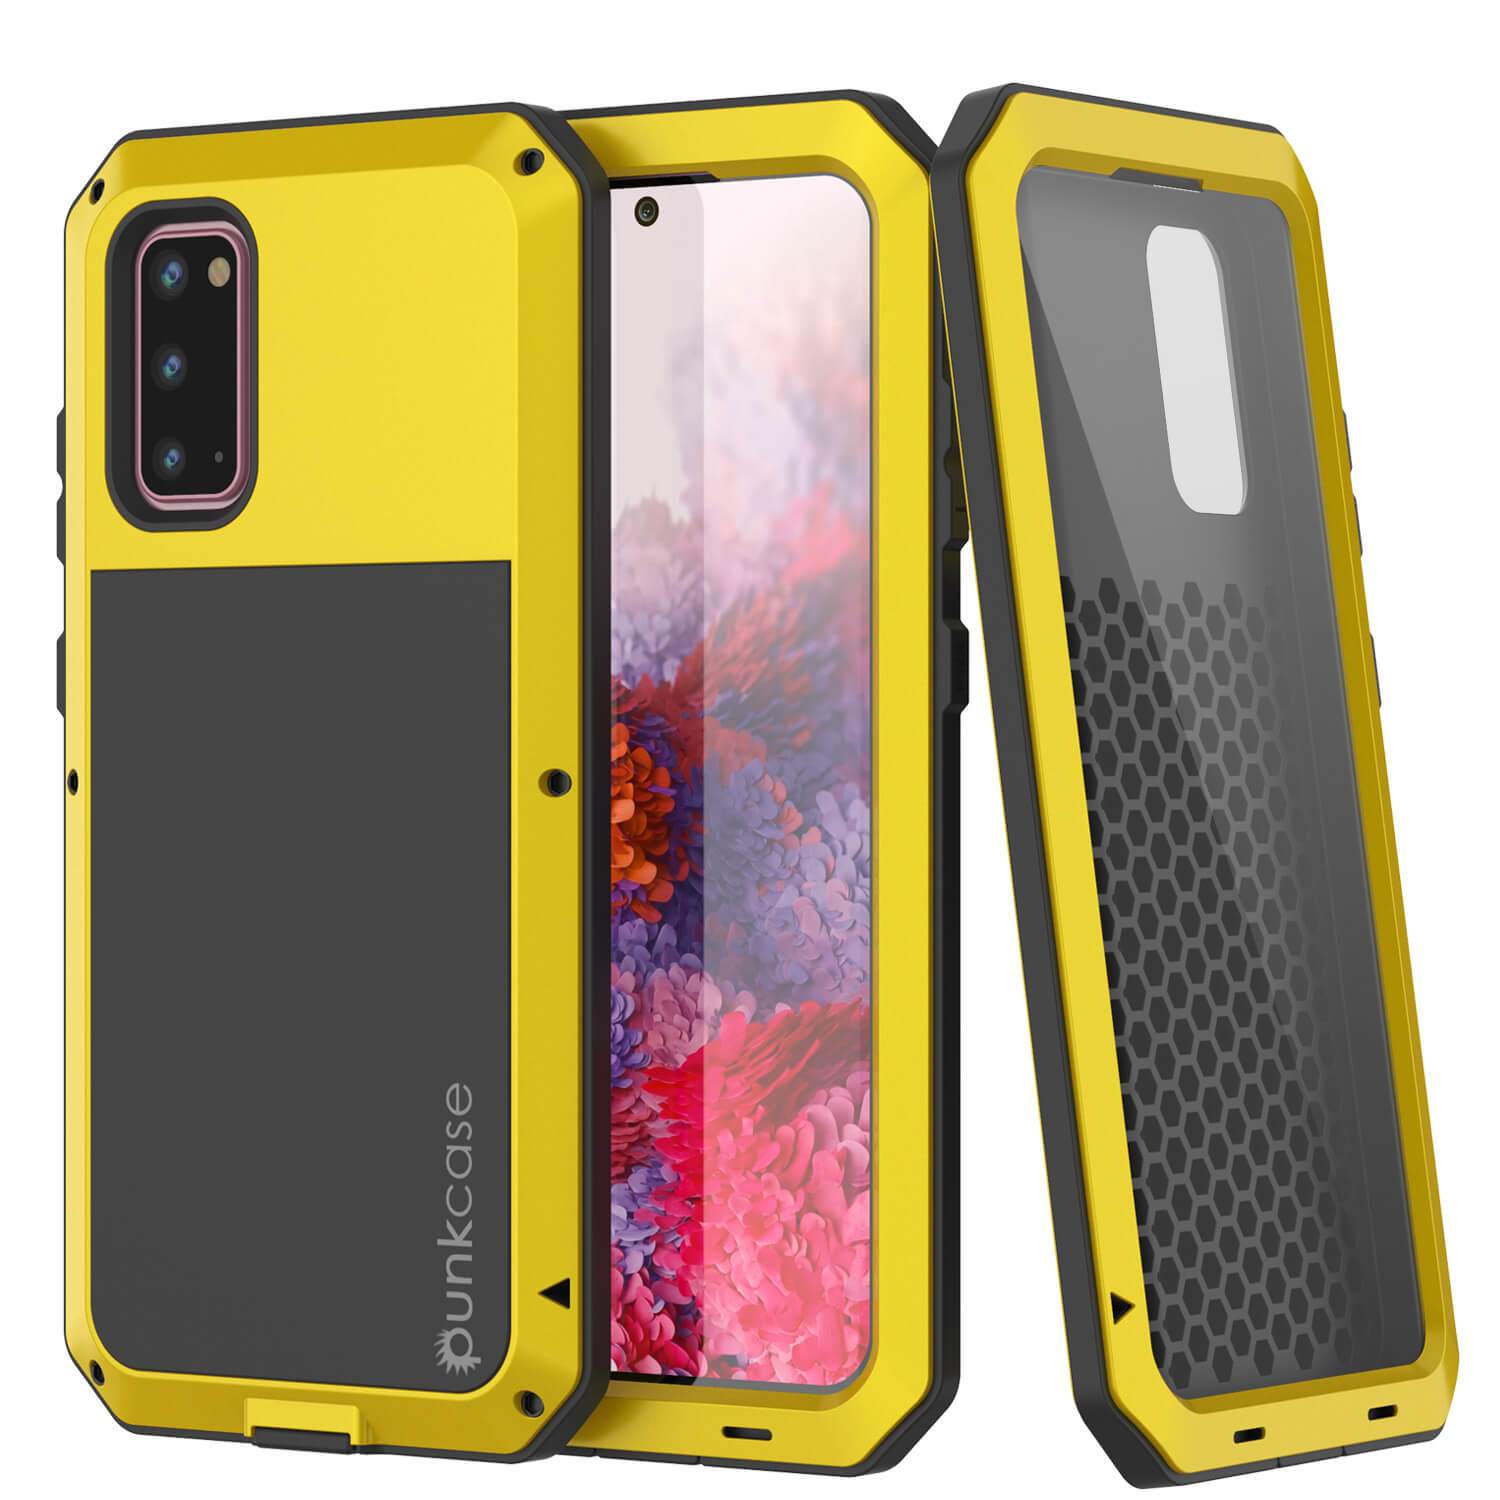 Galaxy s20 Metal Case, Heavy Duty Military Grade Rugged Armor Cover [Neon]